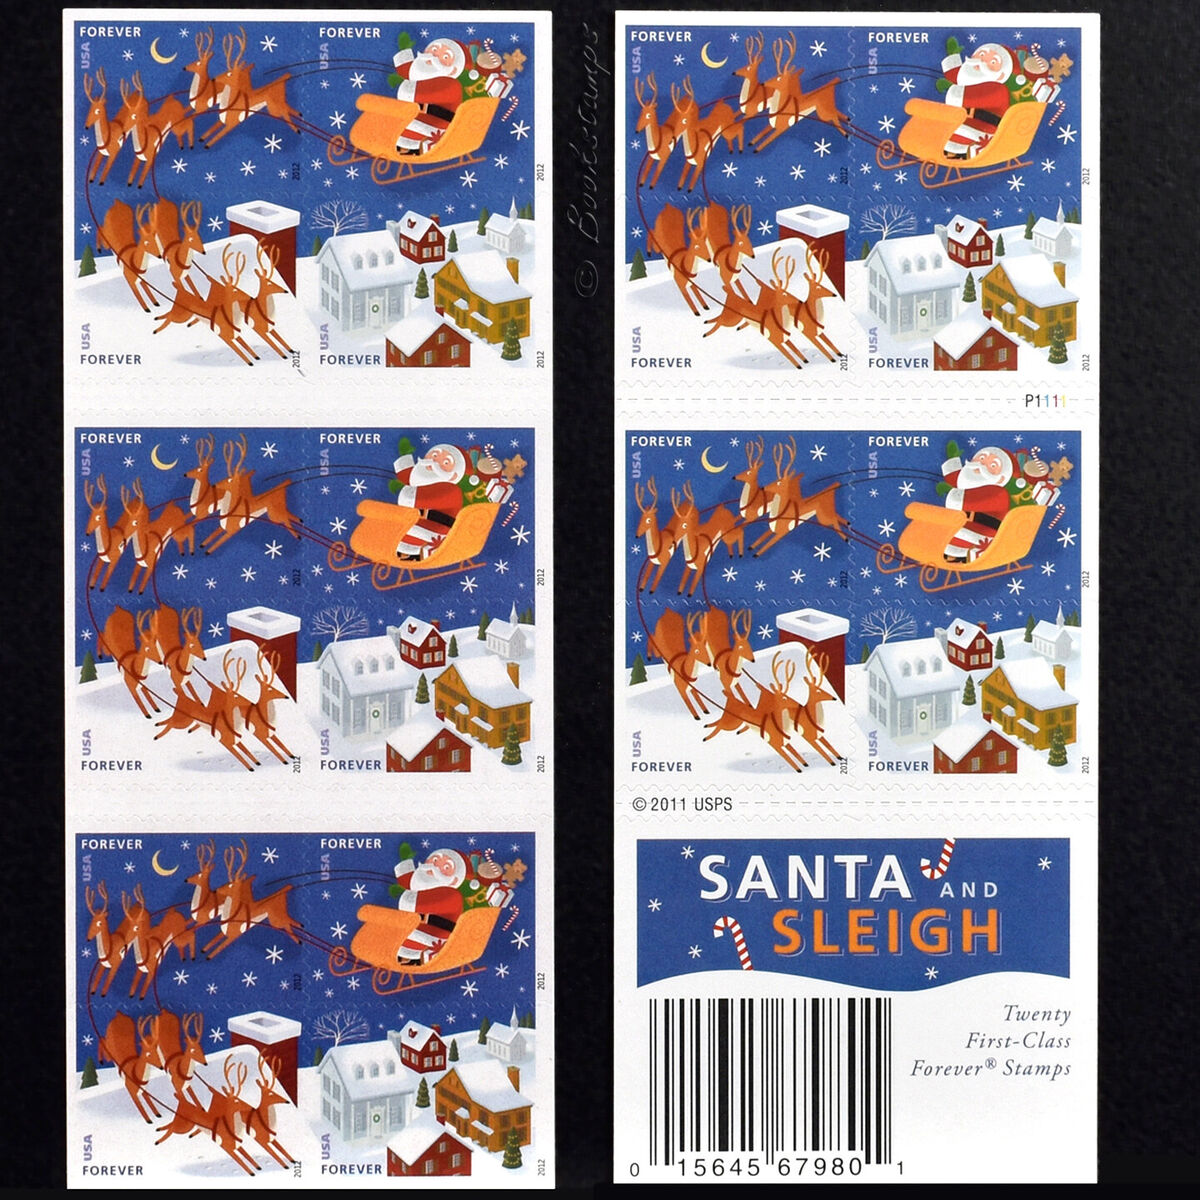 2012 Santa and Sleigh Forever First Class Postage Stamps